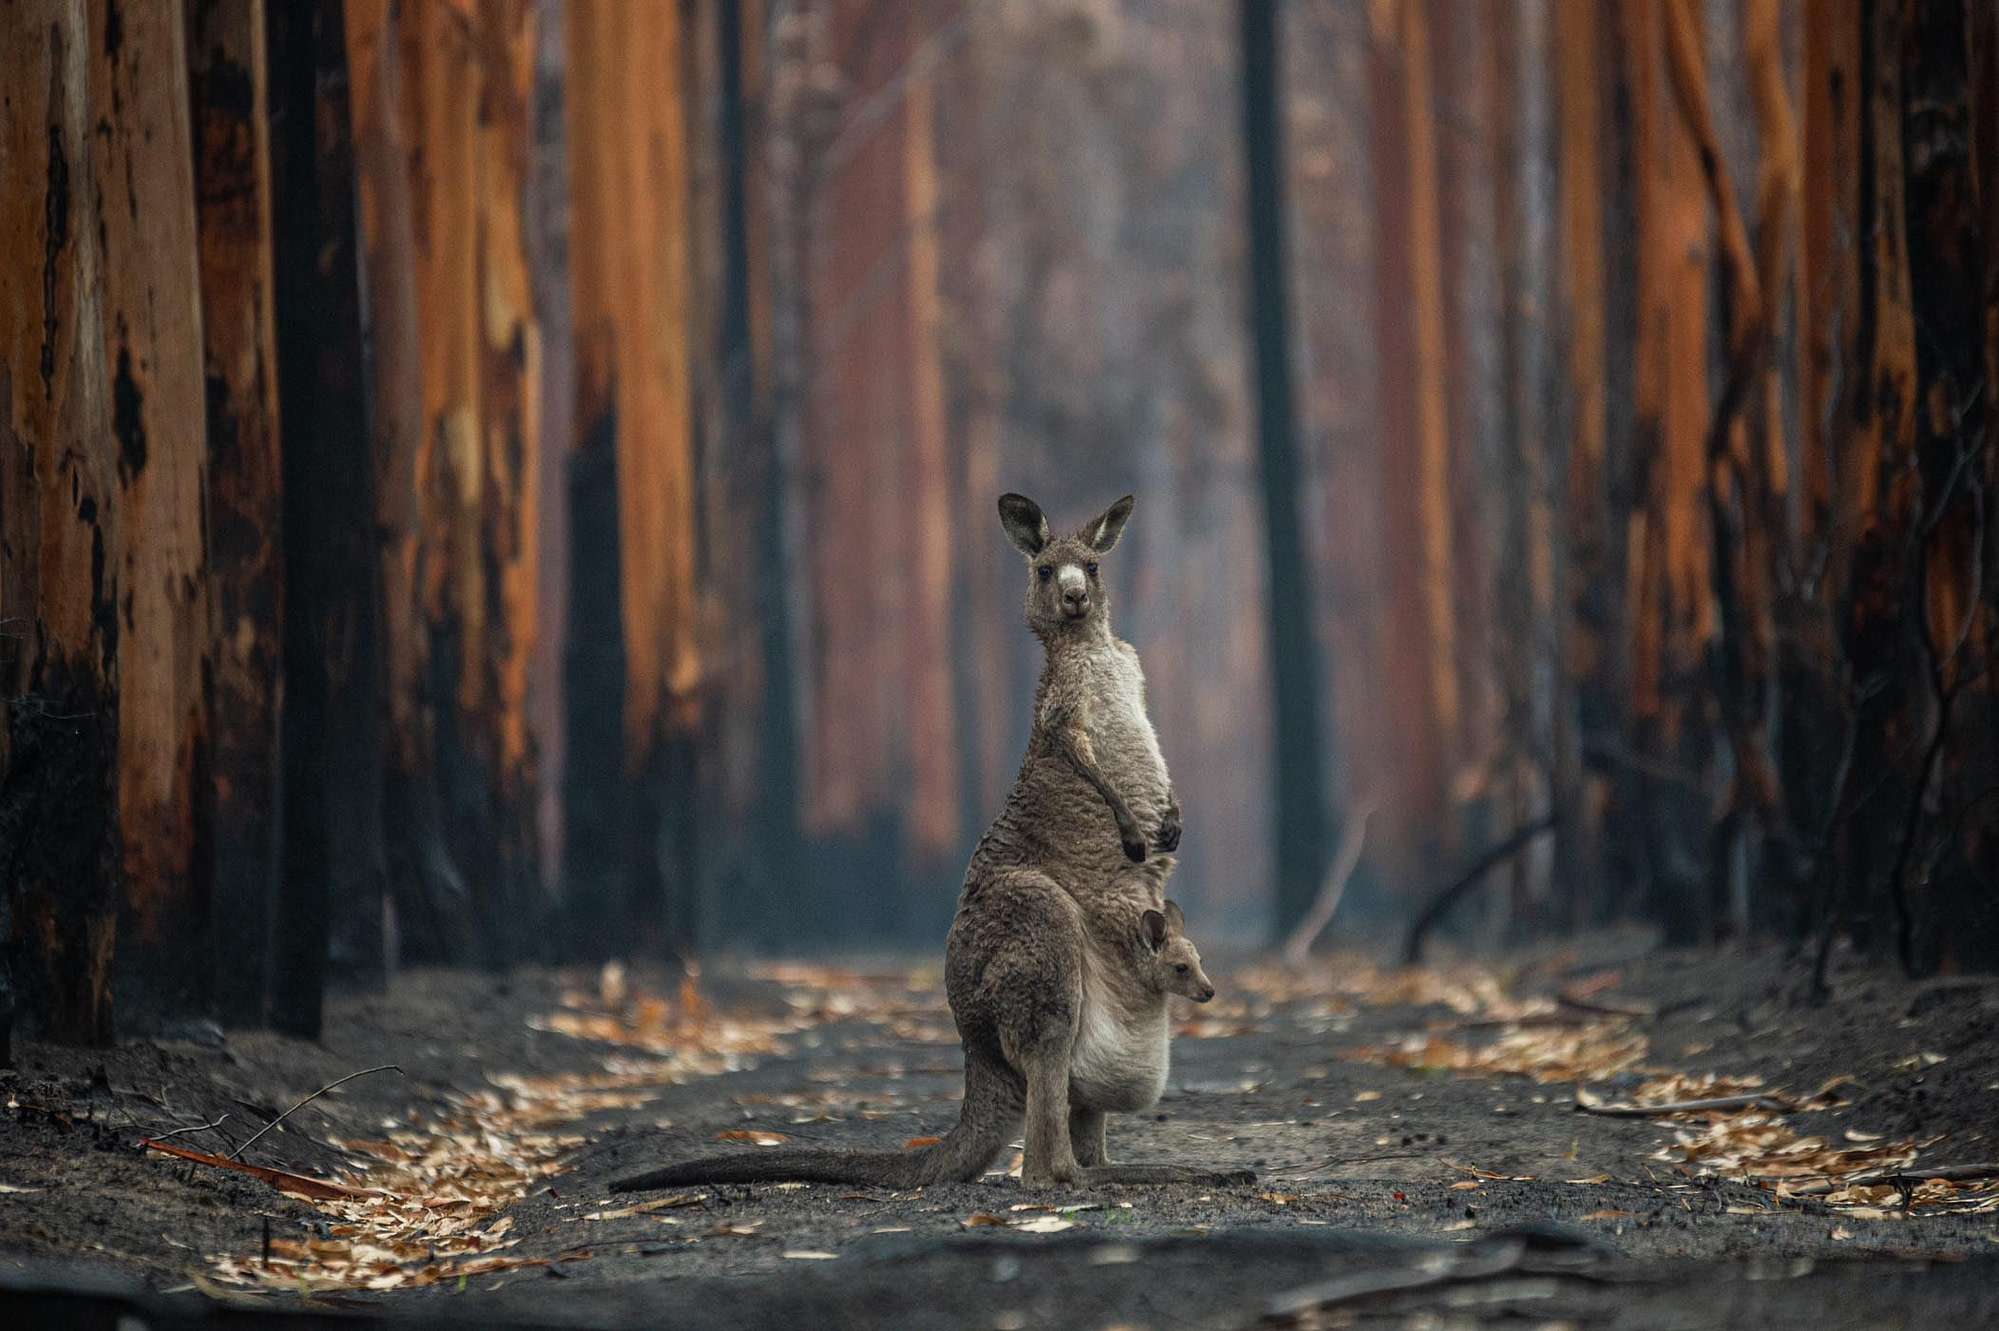 An Eastern grey kangaroo and her joey who survived the forest fires in Mallacoota. Australia, 2020. Jo-Anne McArthur / We Animals Media